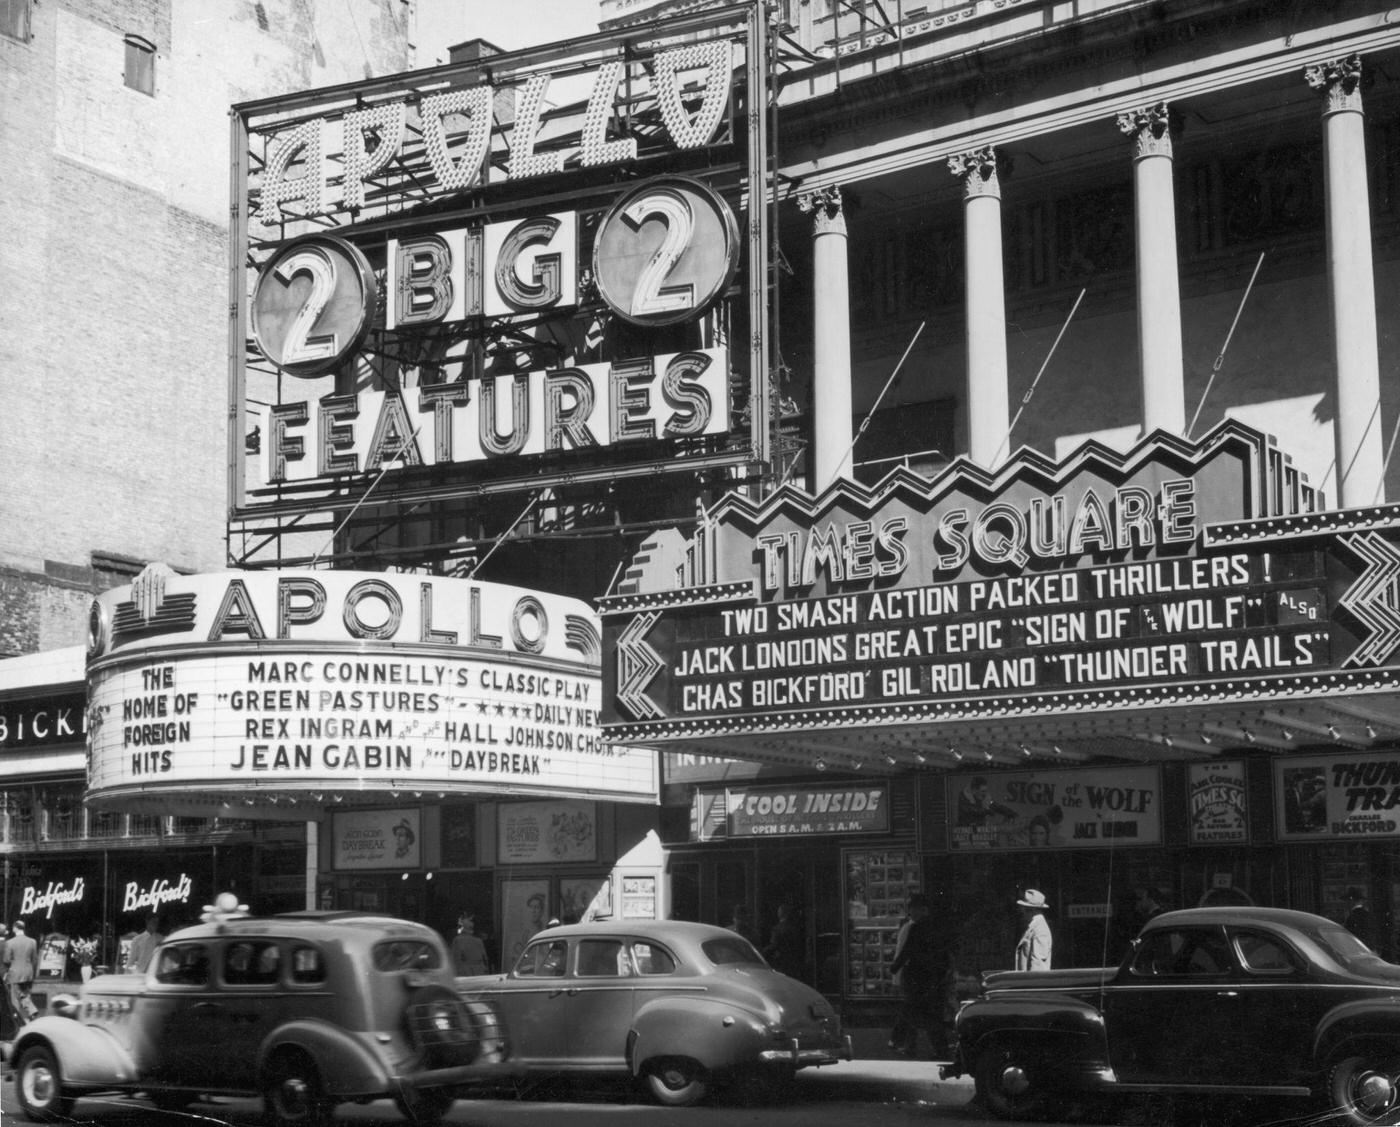 Marquees Of Apollo And Times Square Theaters In Midtown, Manhattan, Circa 1941